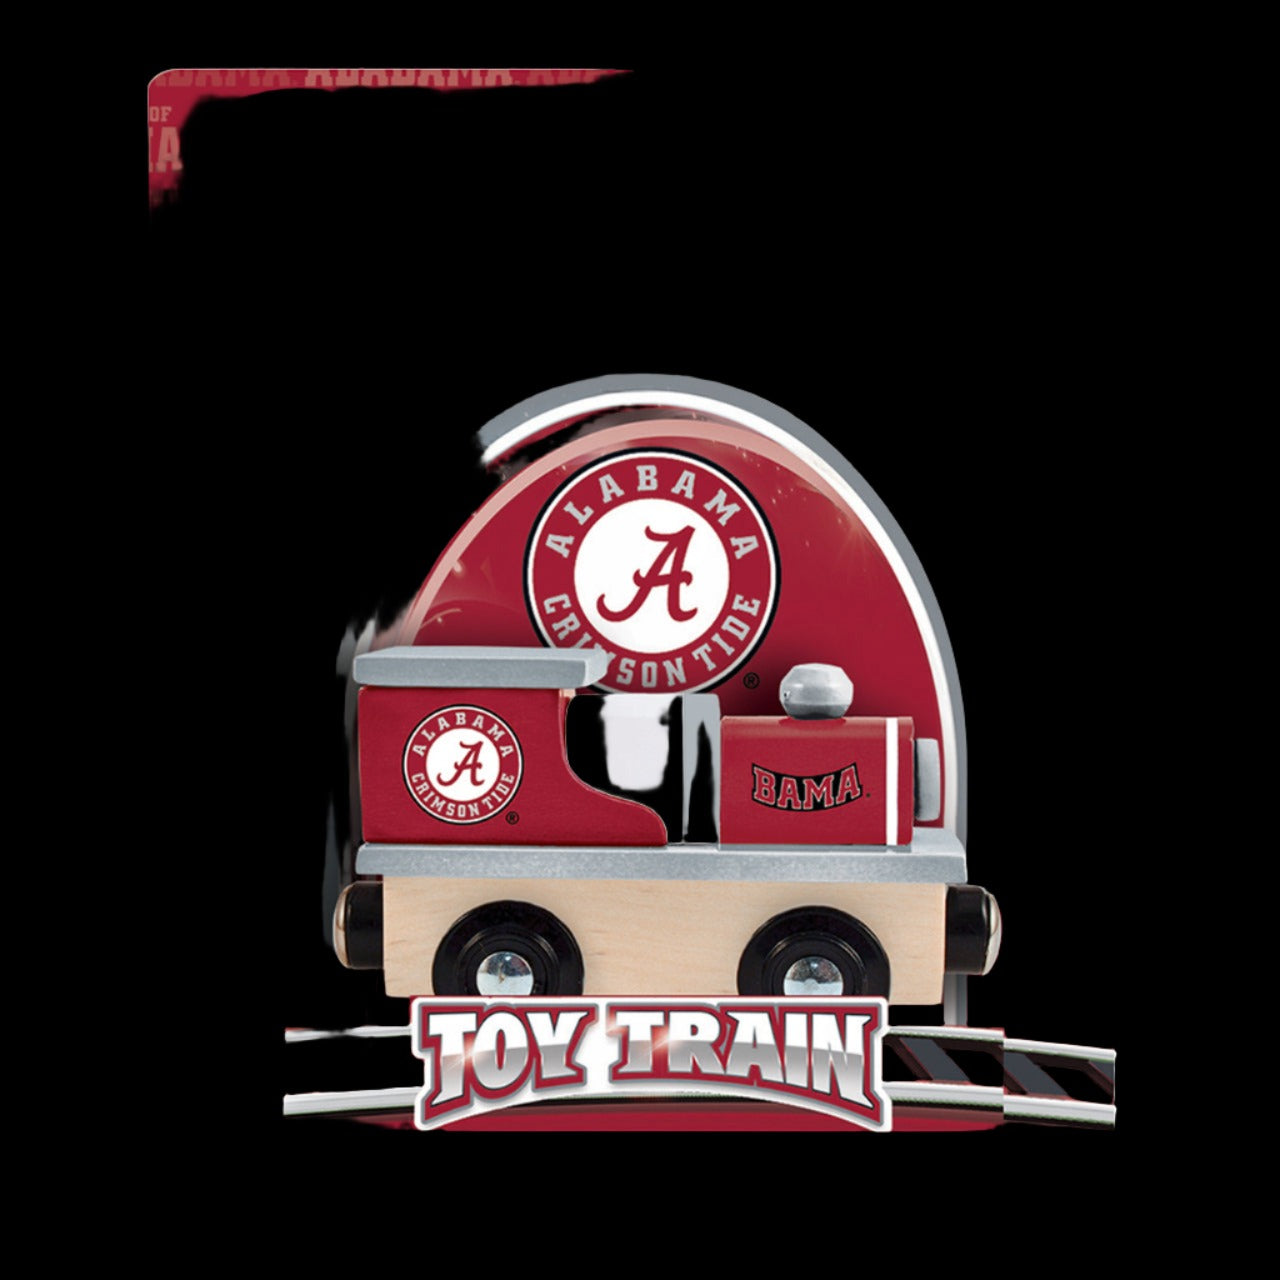 Brand-new Alabama Crimson Tide NCAA Wooden Toy Train Engine. Team graphics, works with wooden tracks. Officially licensed by Masterpieces. Perfect gift for kids 3 and up!